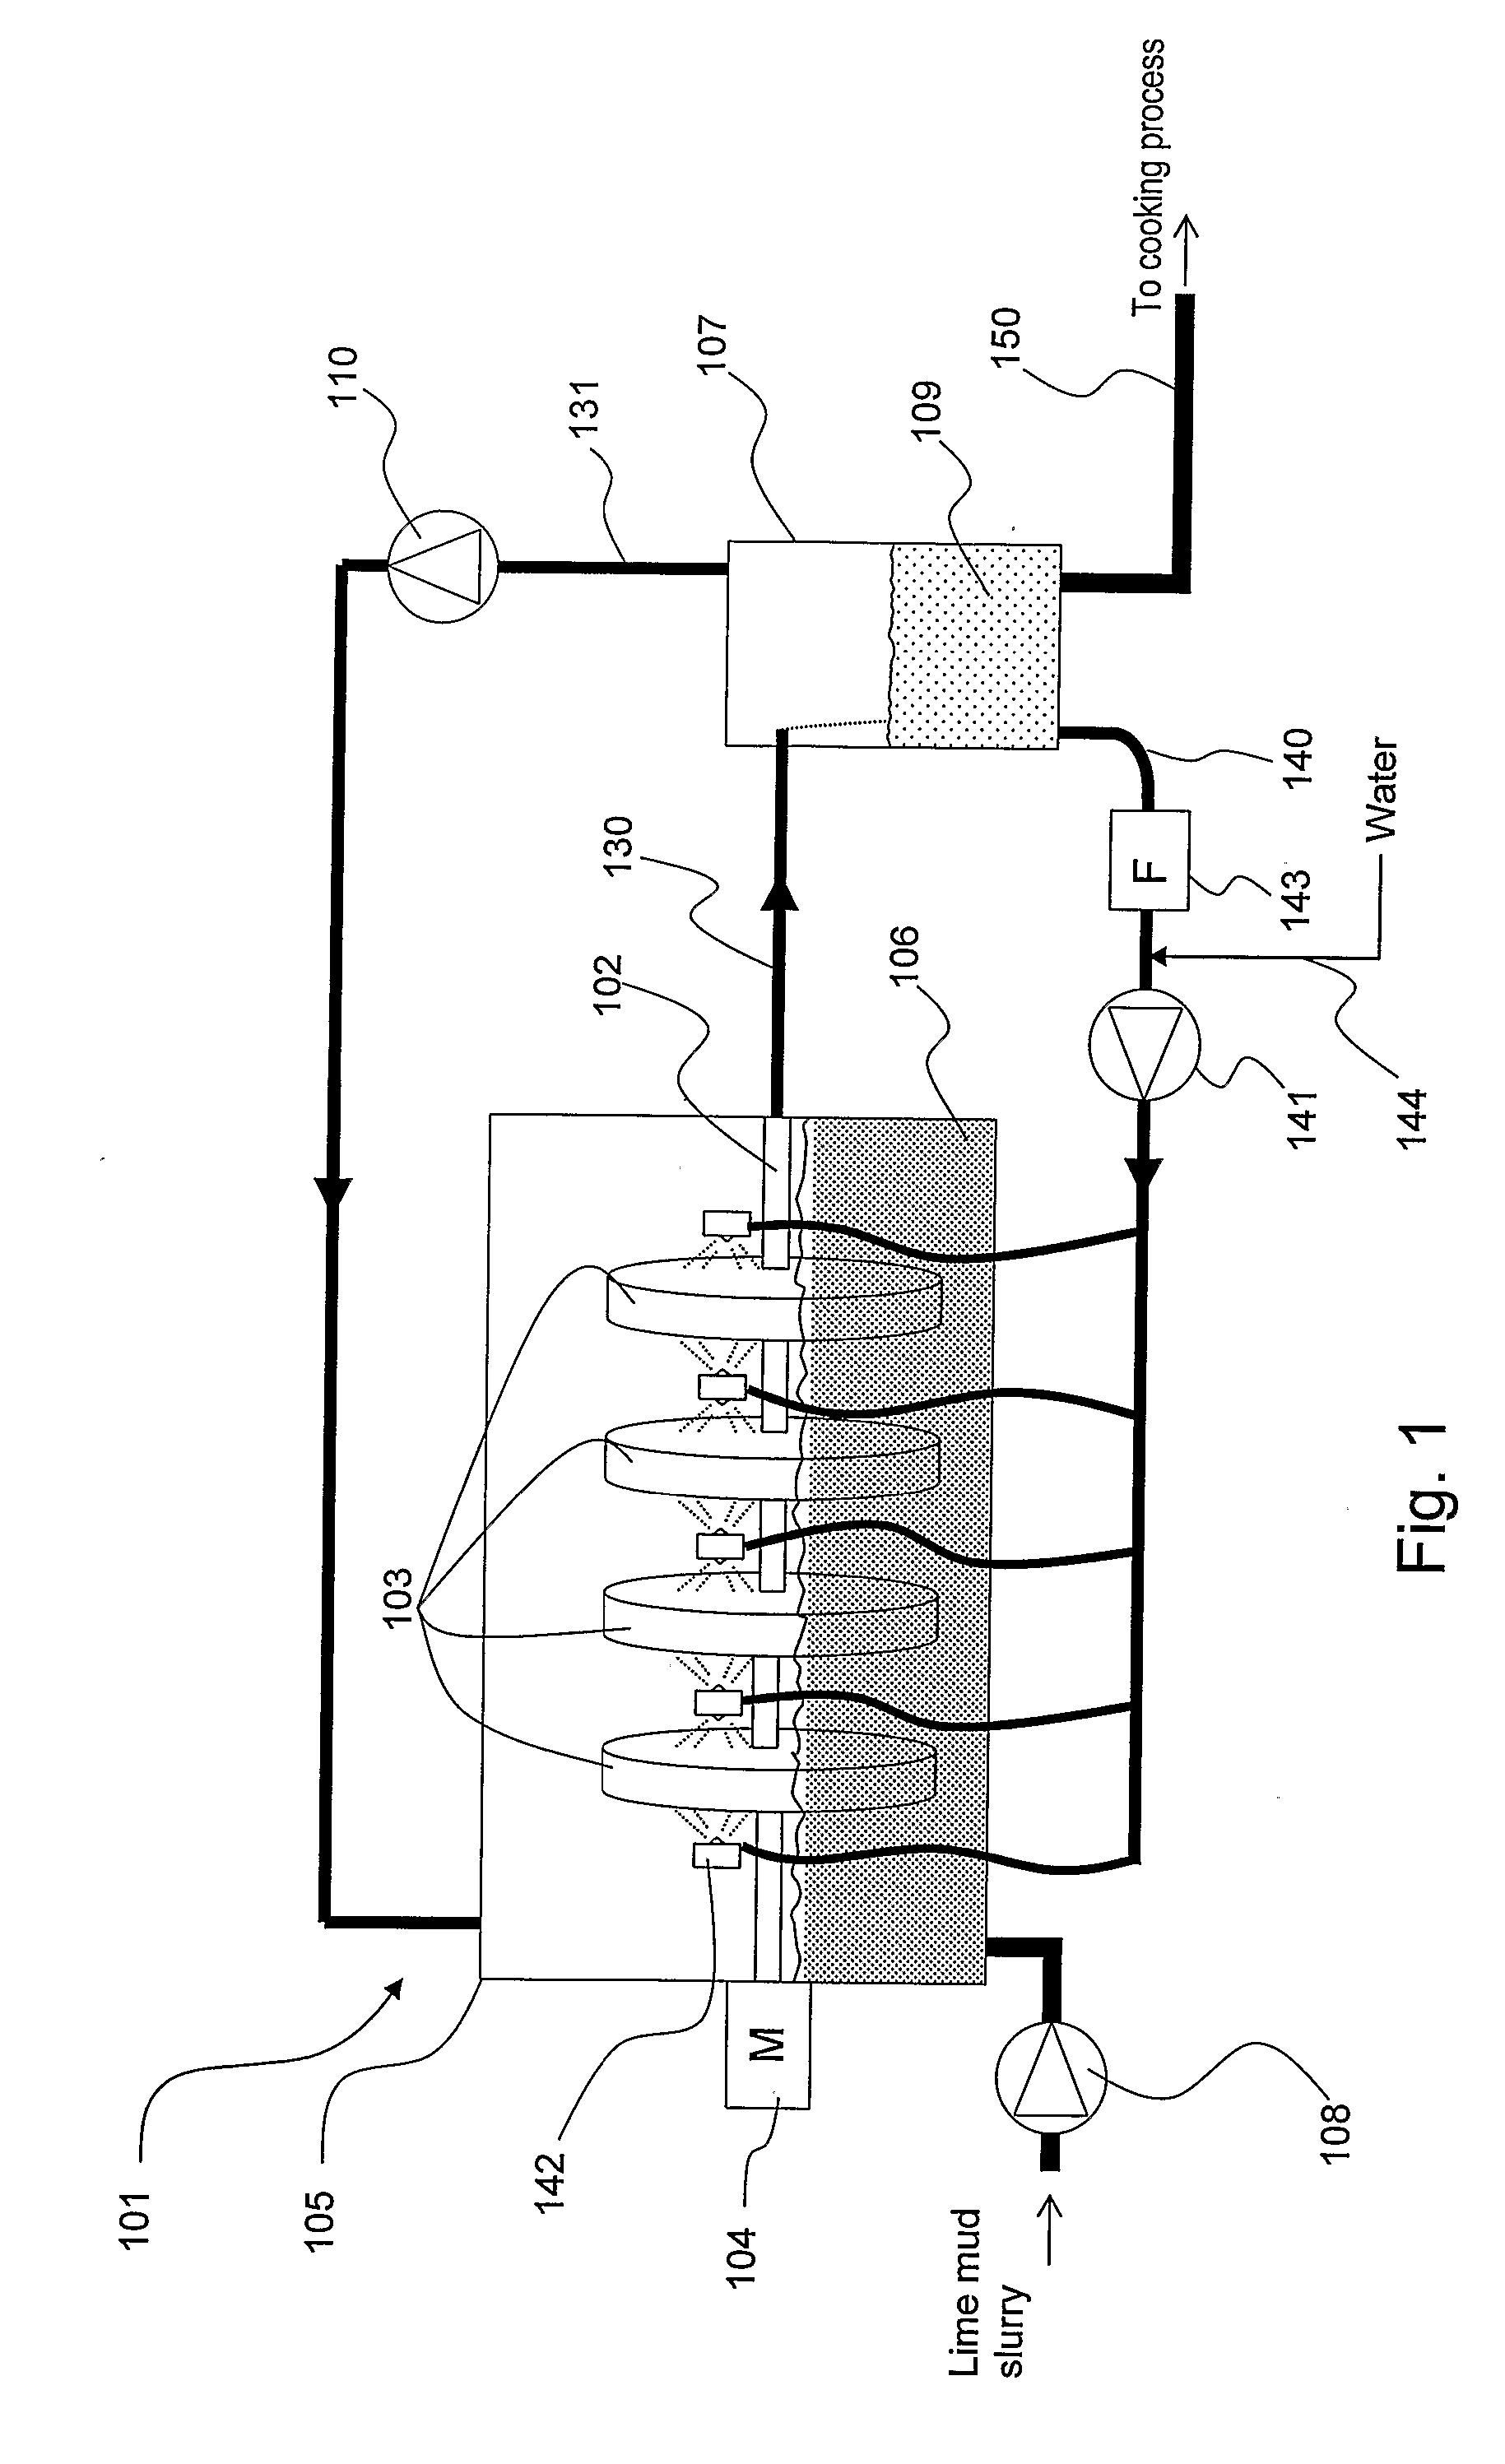 Method and Device for Cleaning of Filter